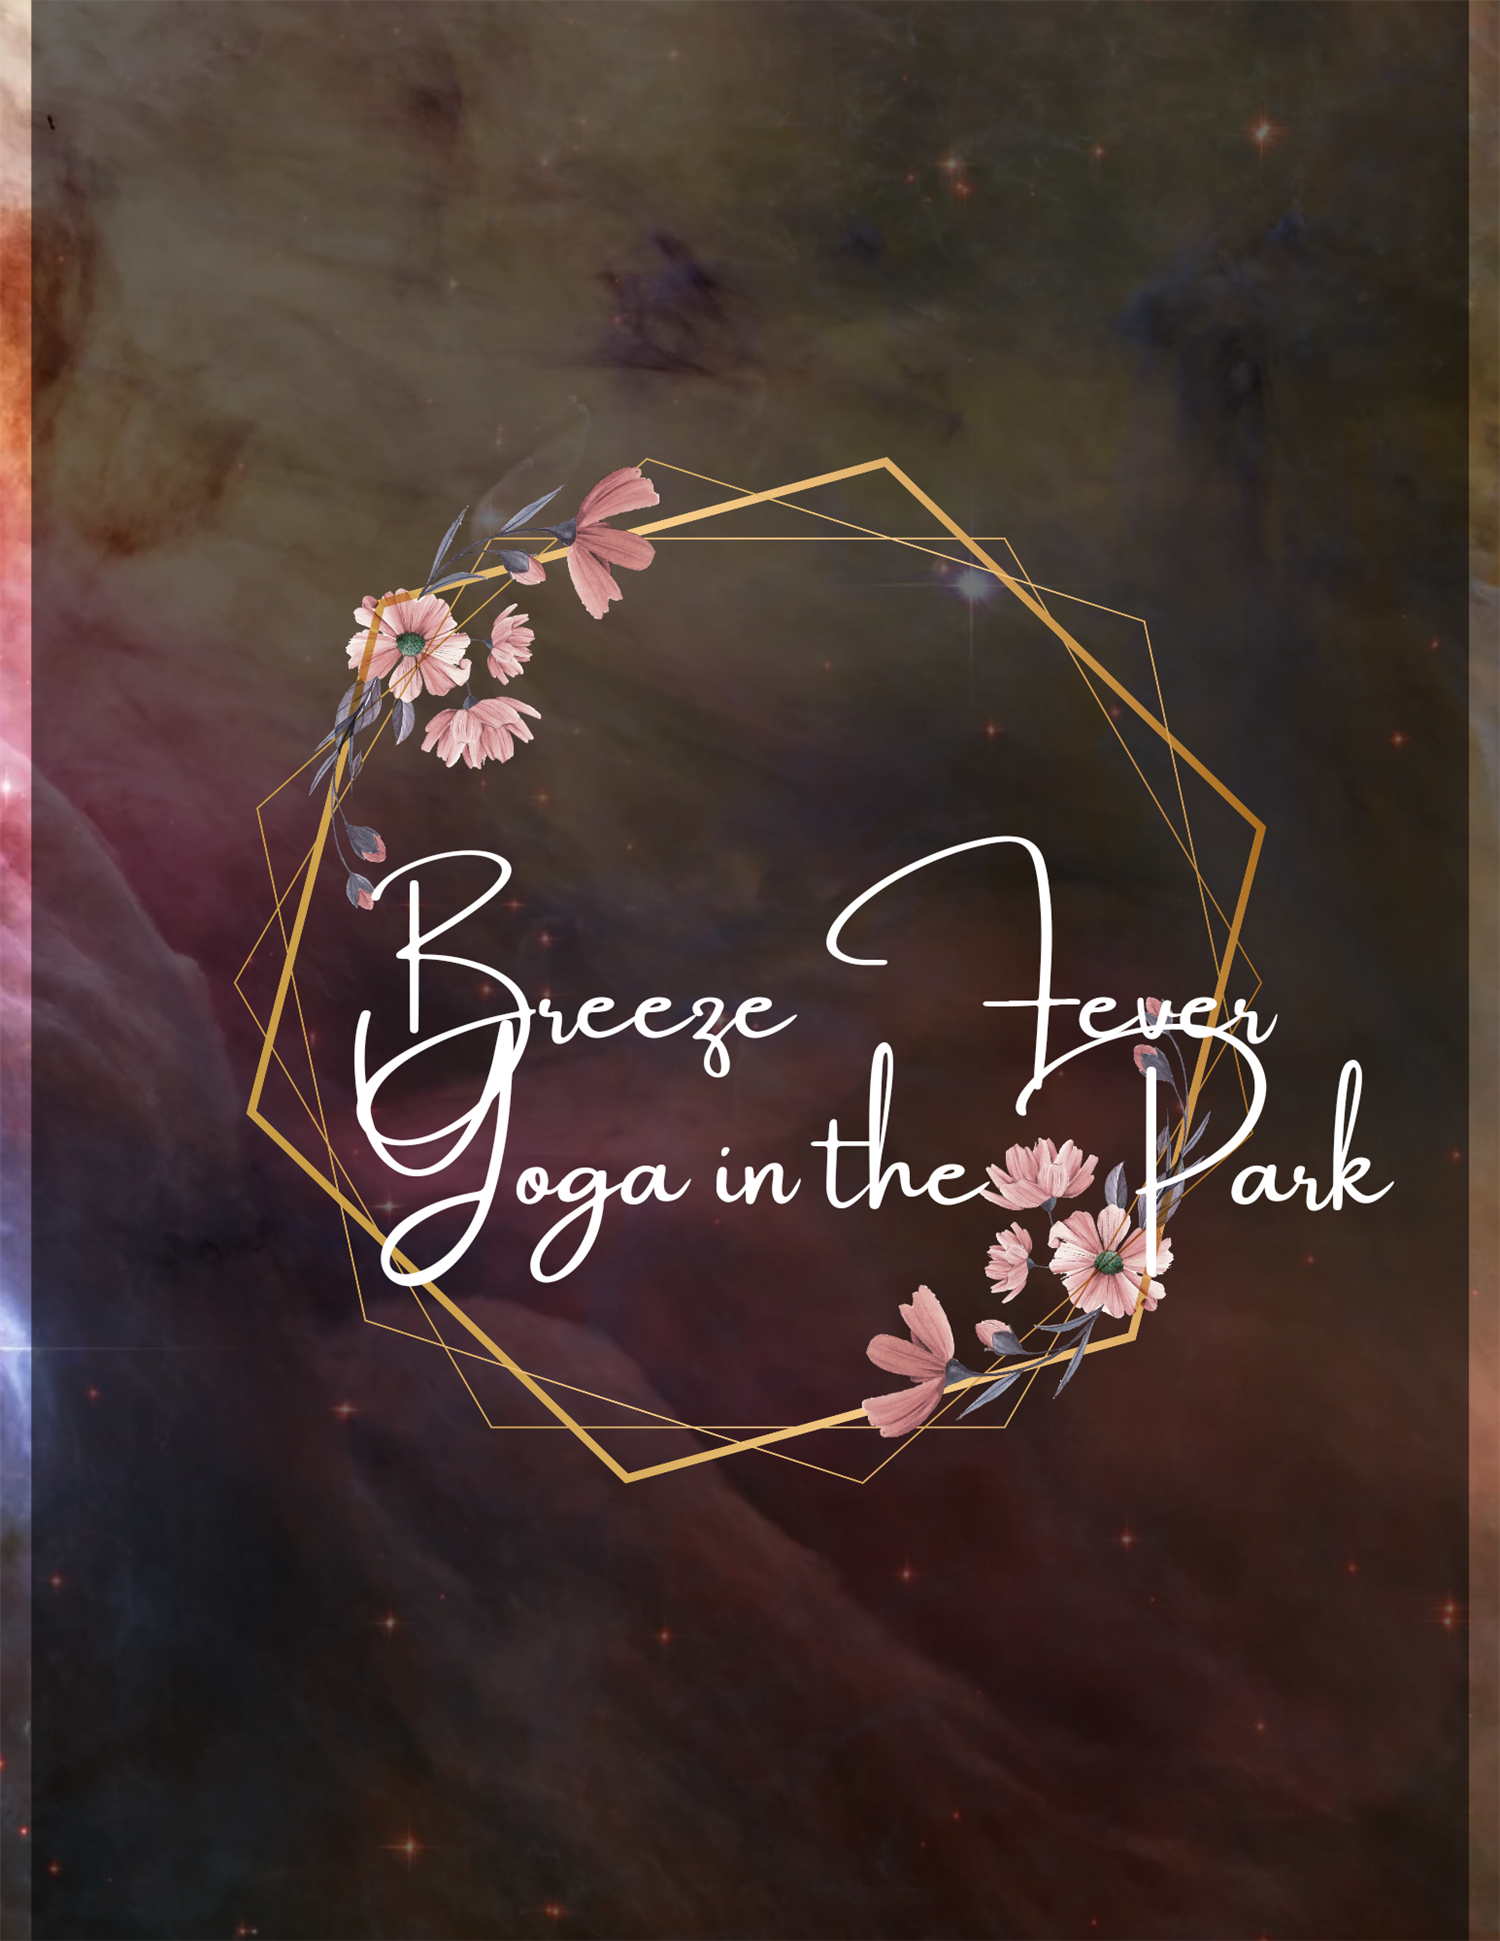 Breeze Fever Yoga in the Park  on Jul 02, 00:00@Chingaucousy Park - Buy tickets and Get information on Breeze Fever Yoga 